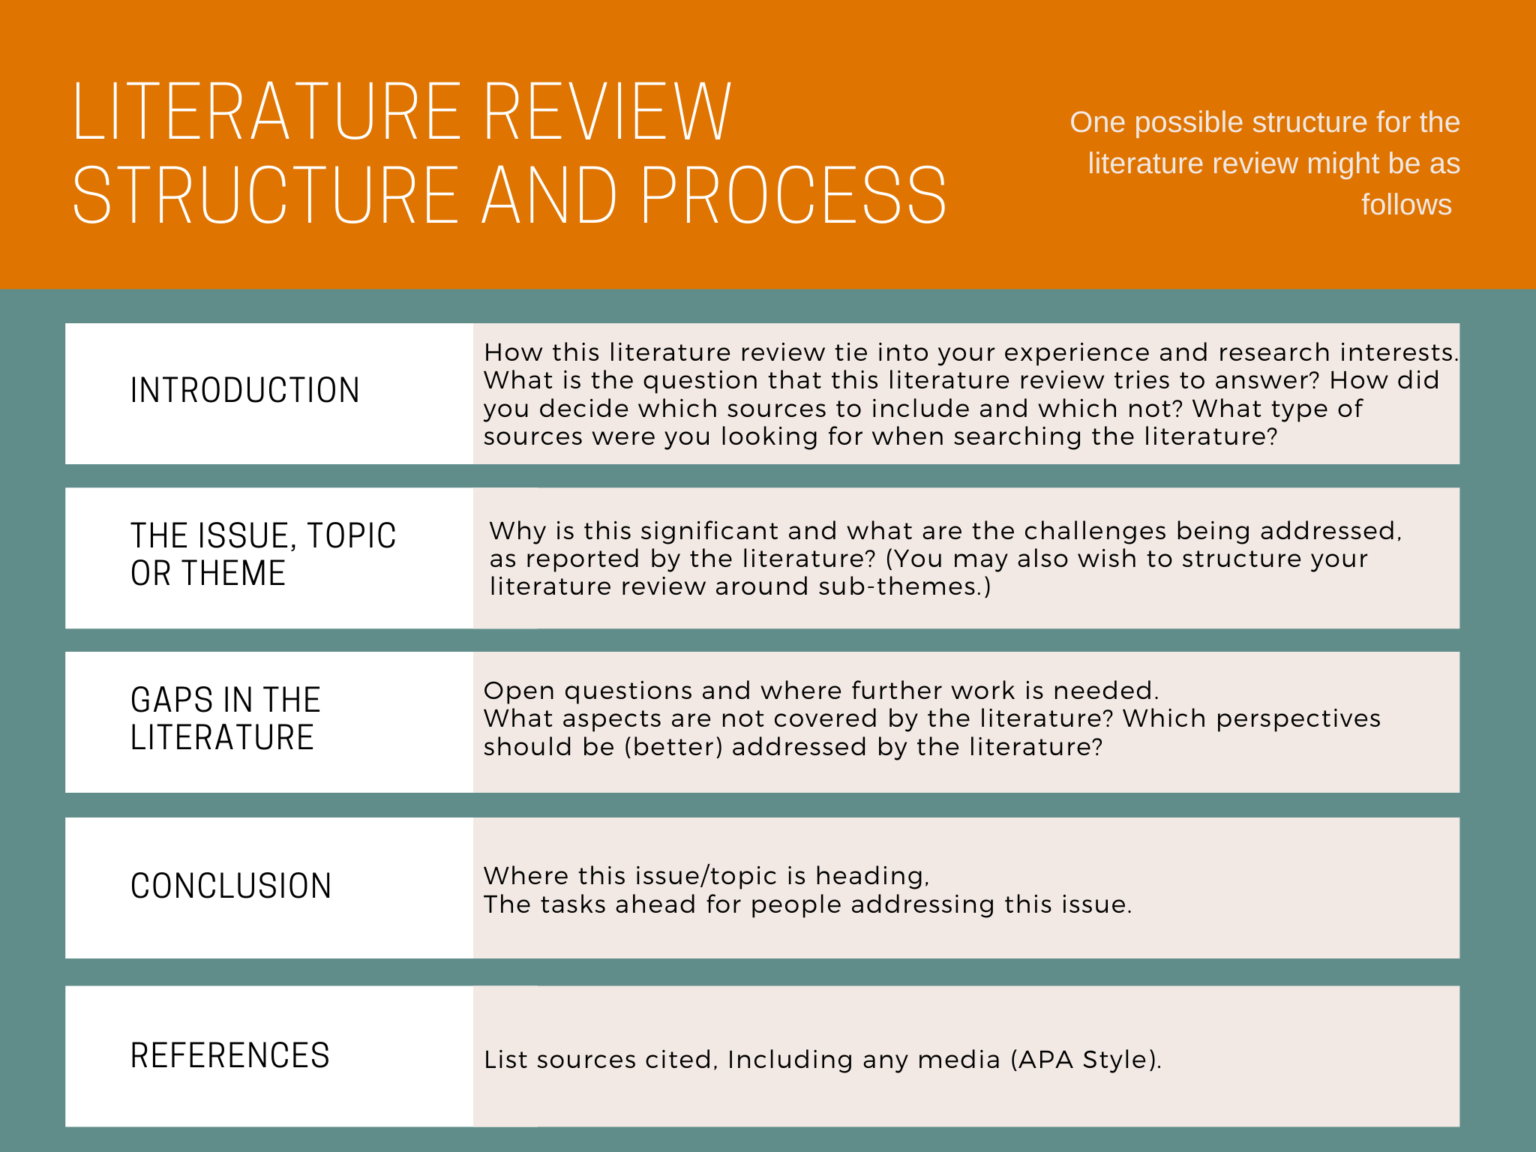 justify the inclusion of literature review in research process pdf